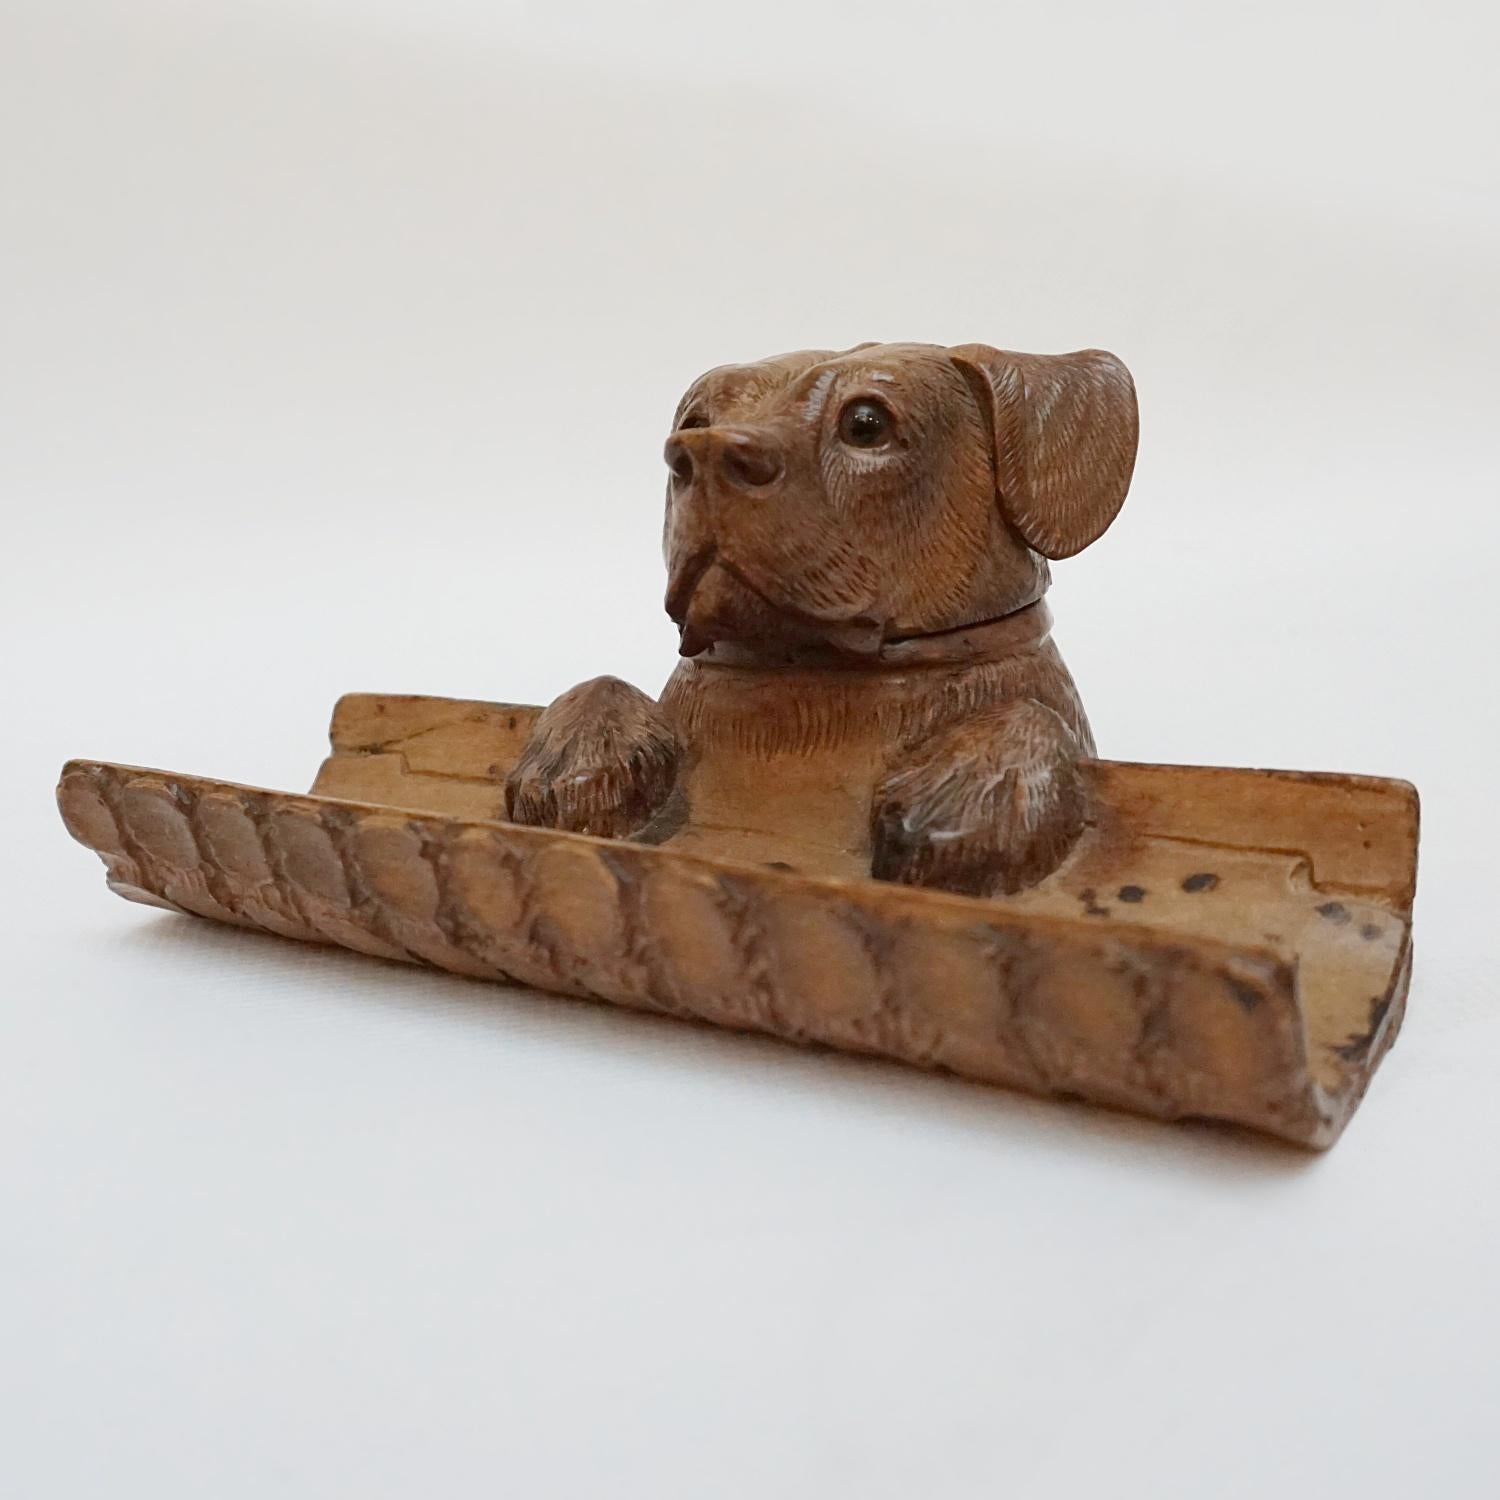 Black Forest dog inkwell and pen holder. A young dog with his paws on a piece of bark peering over the edge. Carved Linden wood. The head of the dog opens to reveal inkwell. 

Dimensions: H 9cm W 19cm D 12cm 

Origin: Swiss

Date: Circa